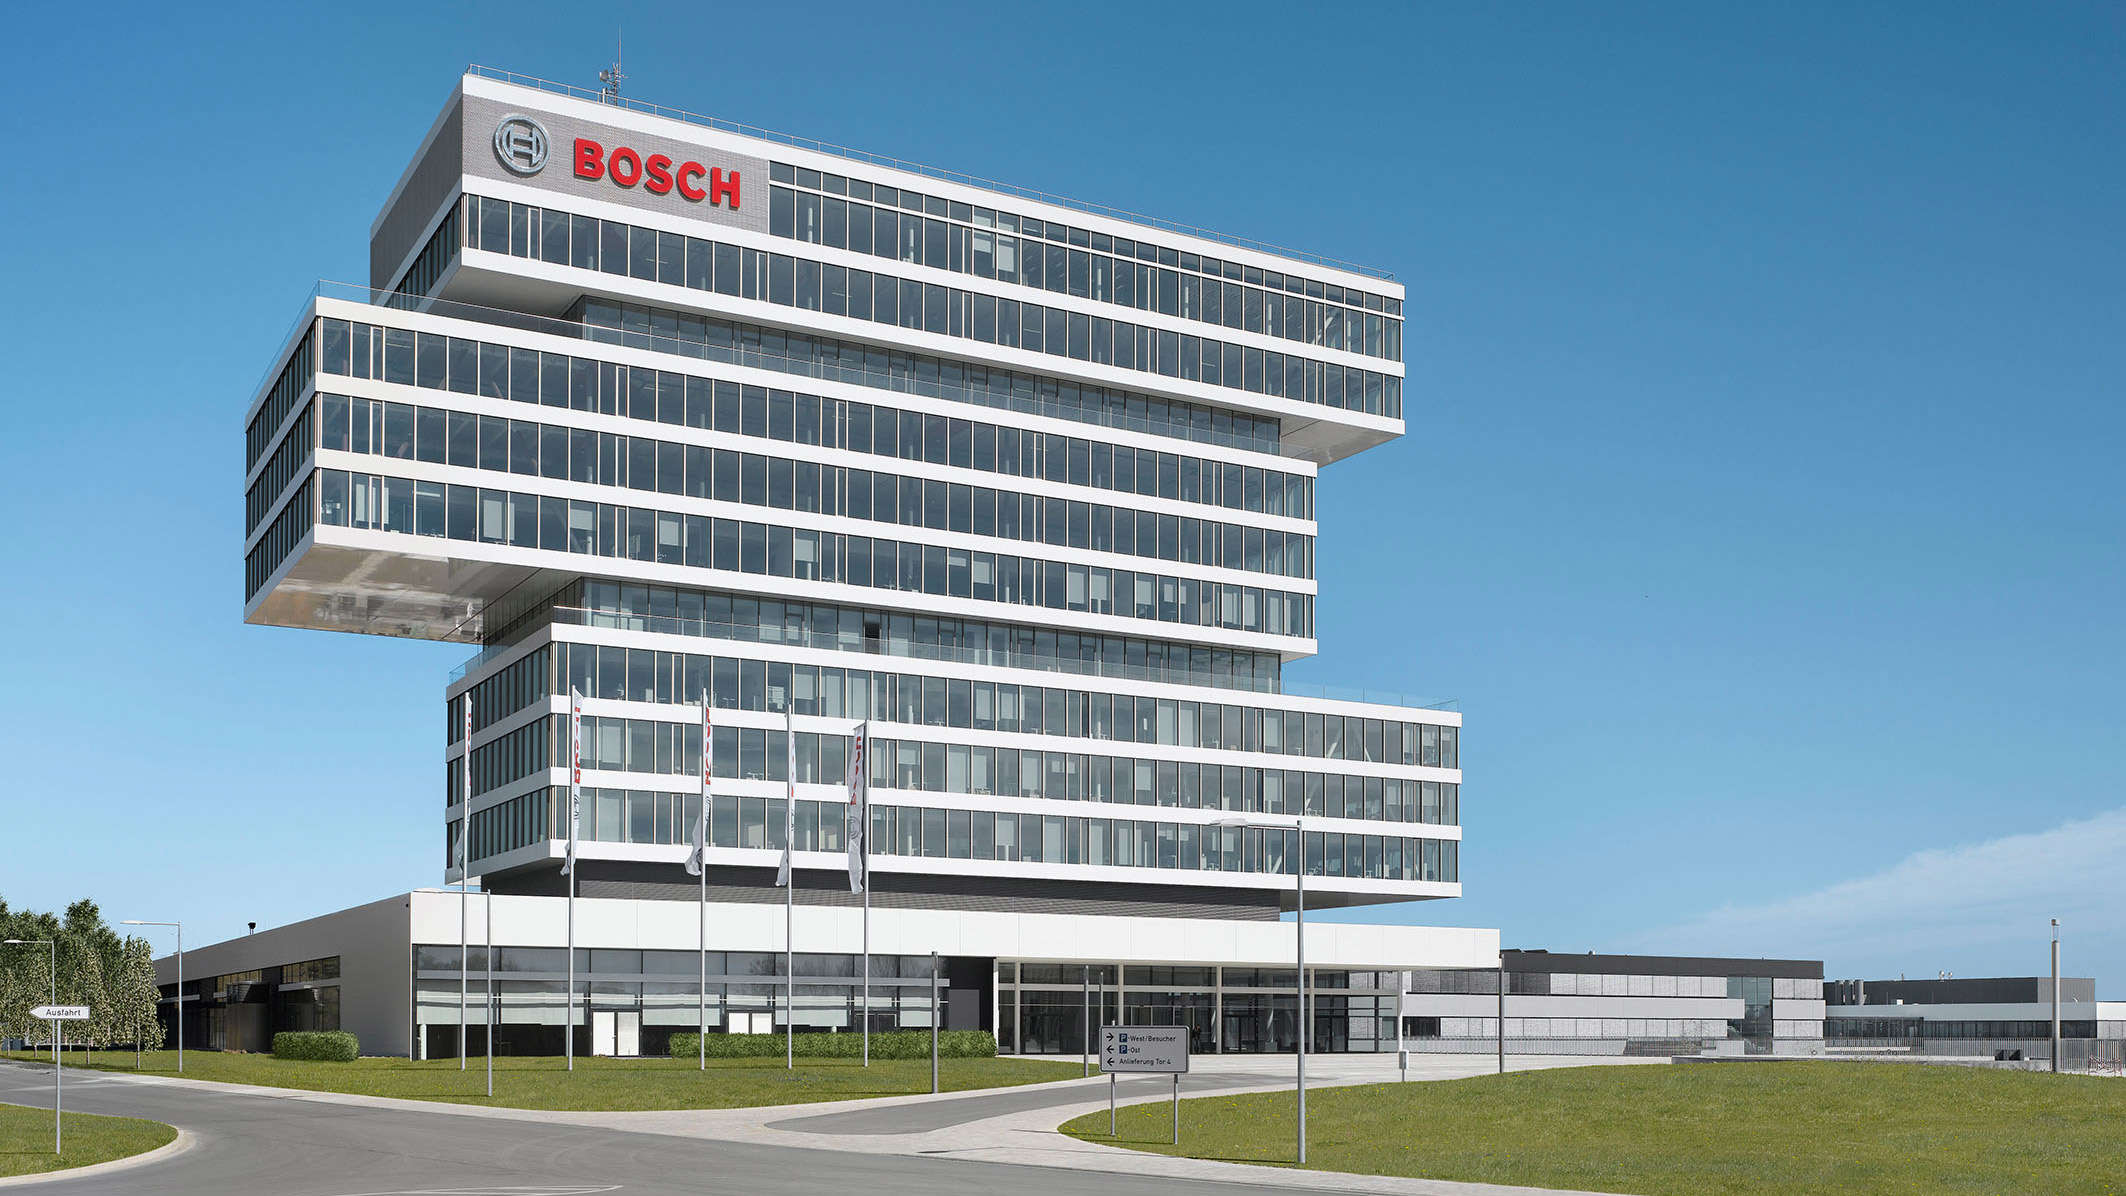 Robert Bosch Engineering and Business Solutions to hire 2,500 people in India this year